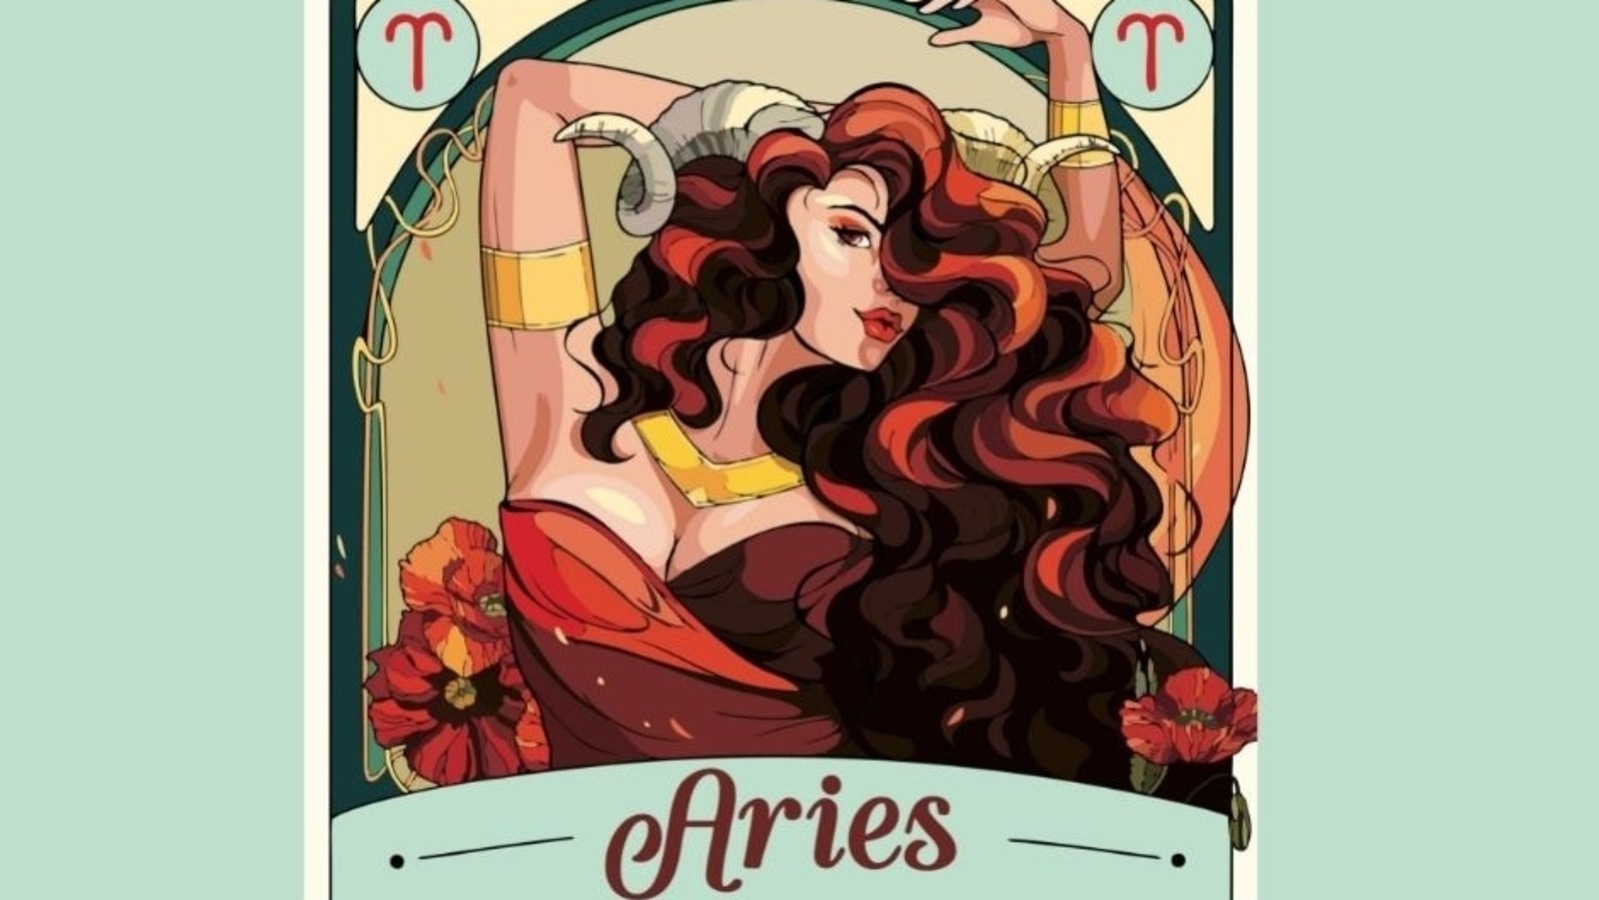 Aries Horoscope Today: Daily predictions for June 28,'22 states, great health